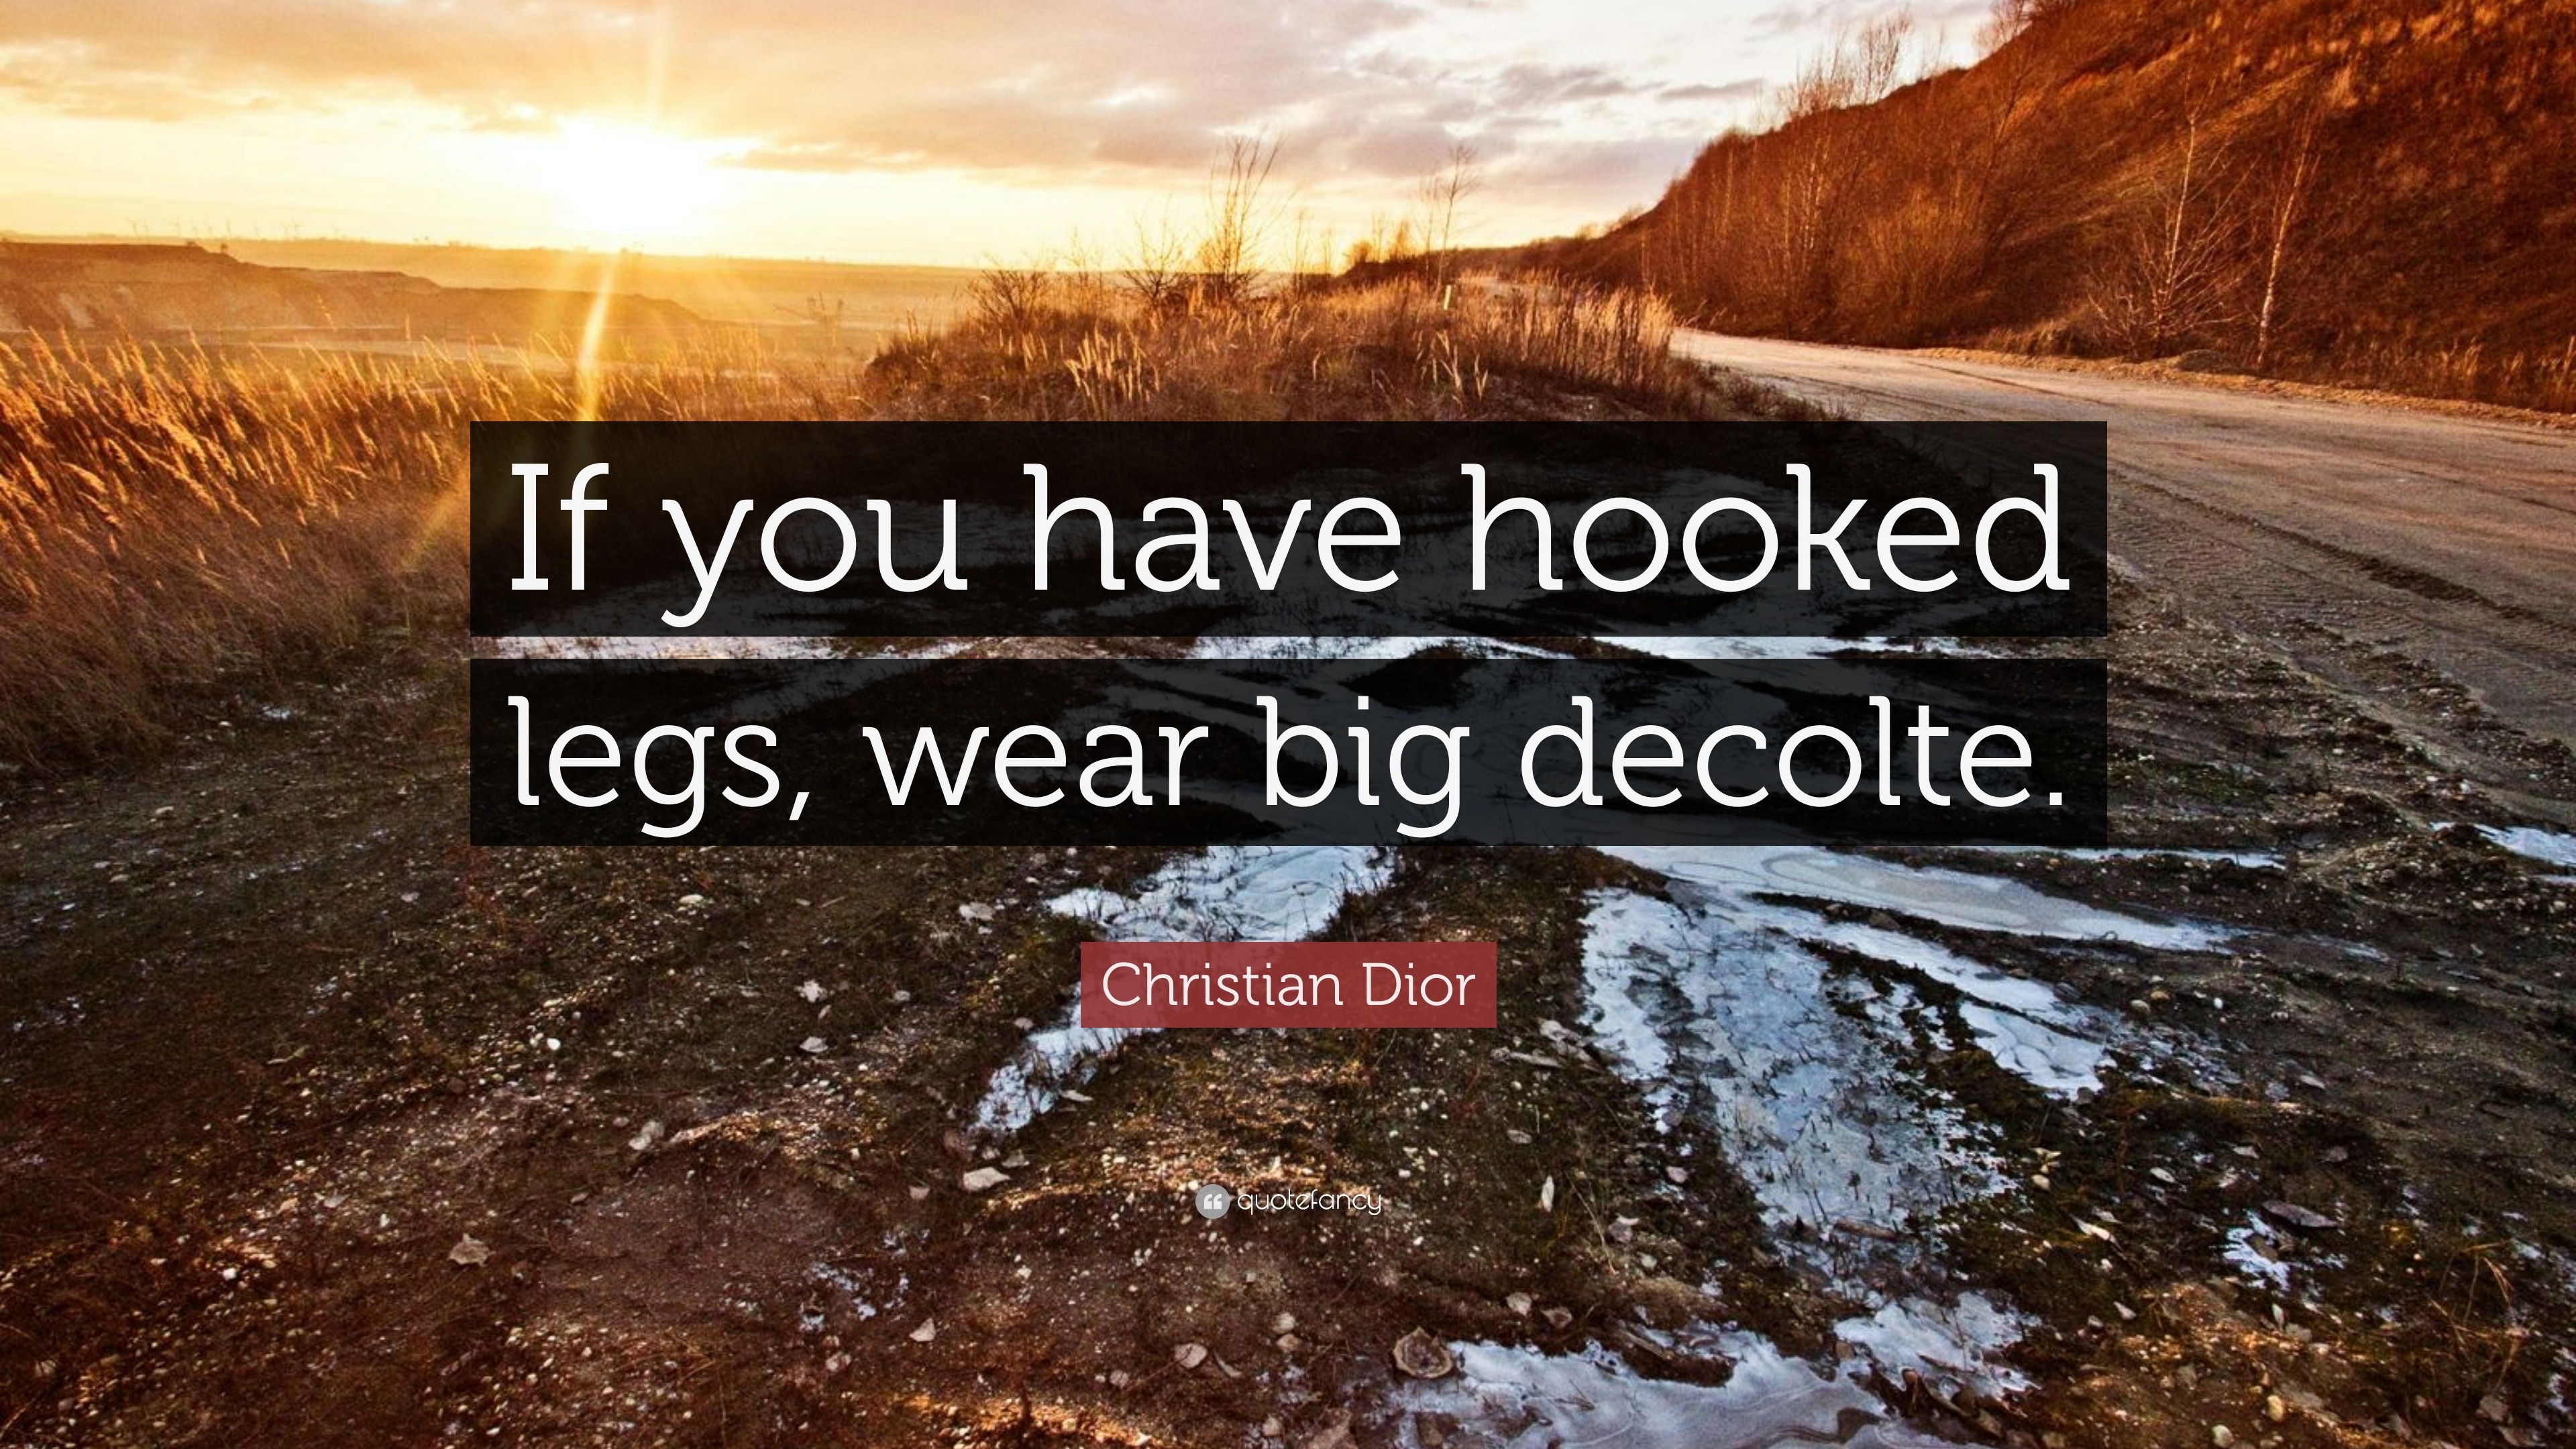 https://quotefancy.com/media/wallpaper/3840x2160/900343-Christian-Dior-Quote-If-you-have-hooked-legs-wear-big-decolte.jpg